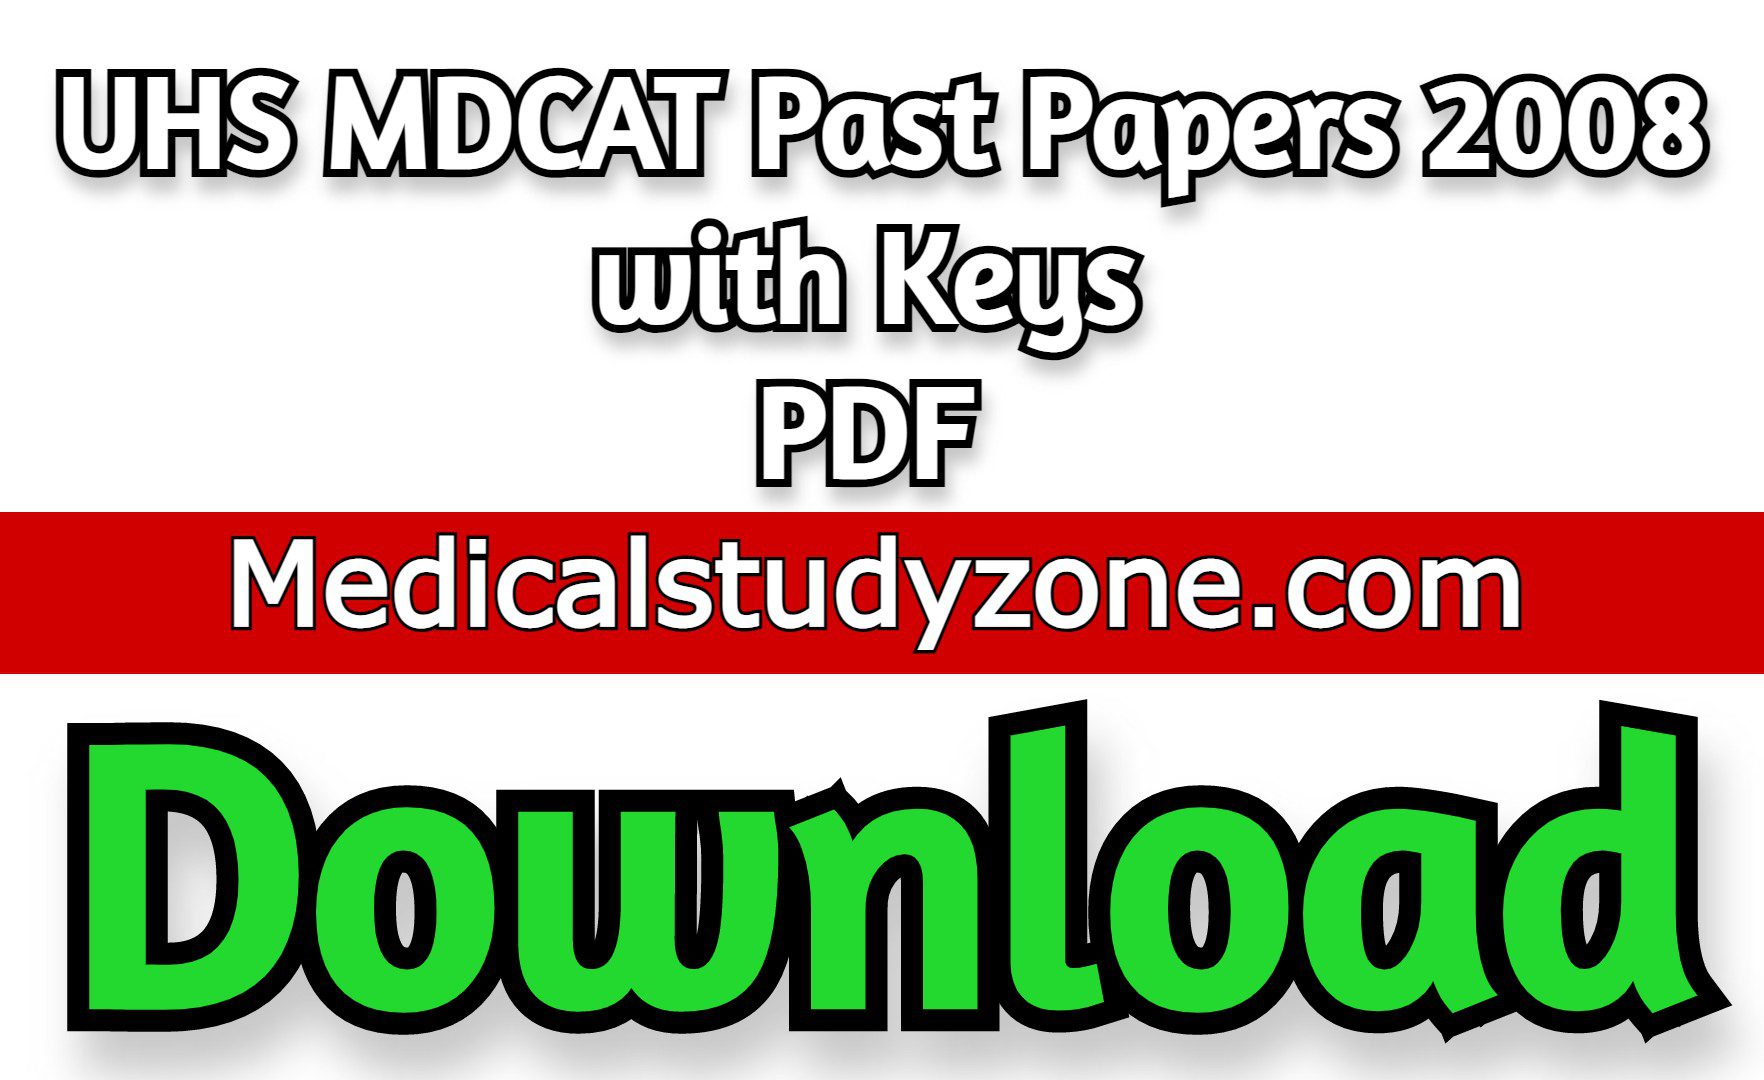 UHS MDCAT Past Papers 2008 with Keys PDF Free Download